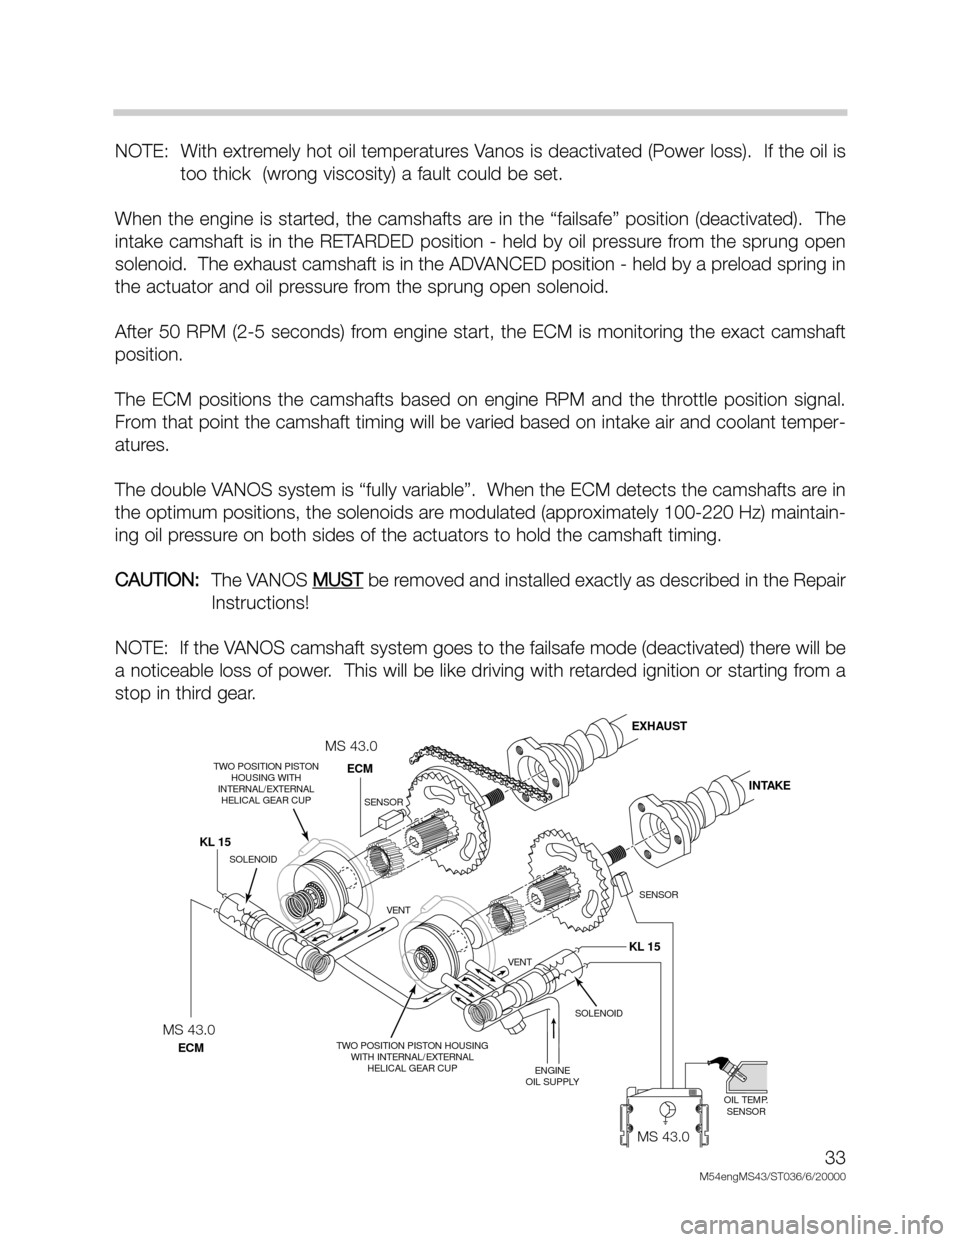 BMW X5 2005 E53 M54 Engine Workshop Manual 33
M54engMS43/ST036/6/20000
NOTE:  With extremely hot oil temperatures Vanos is deactivated (Power loss).  If the oil is
too thick  (wrong viscosity) a fault could be set.
When the engine is started, 